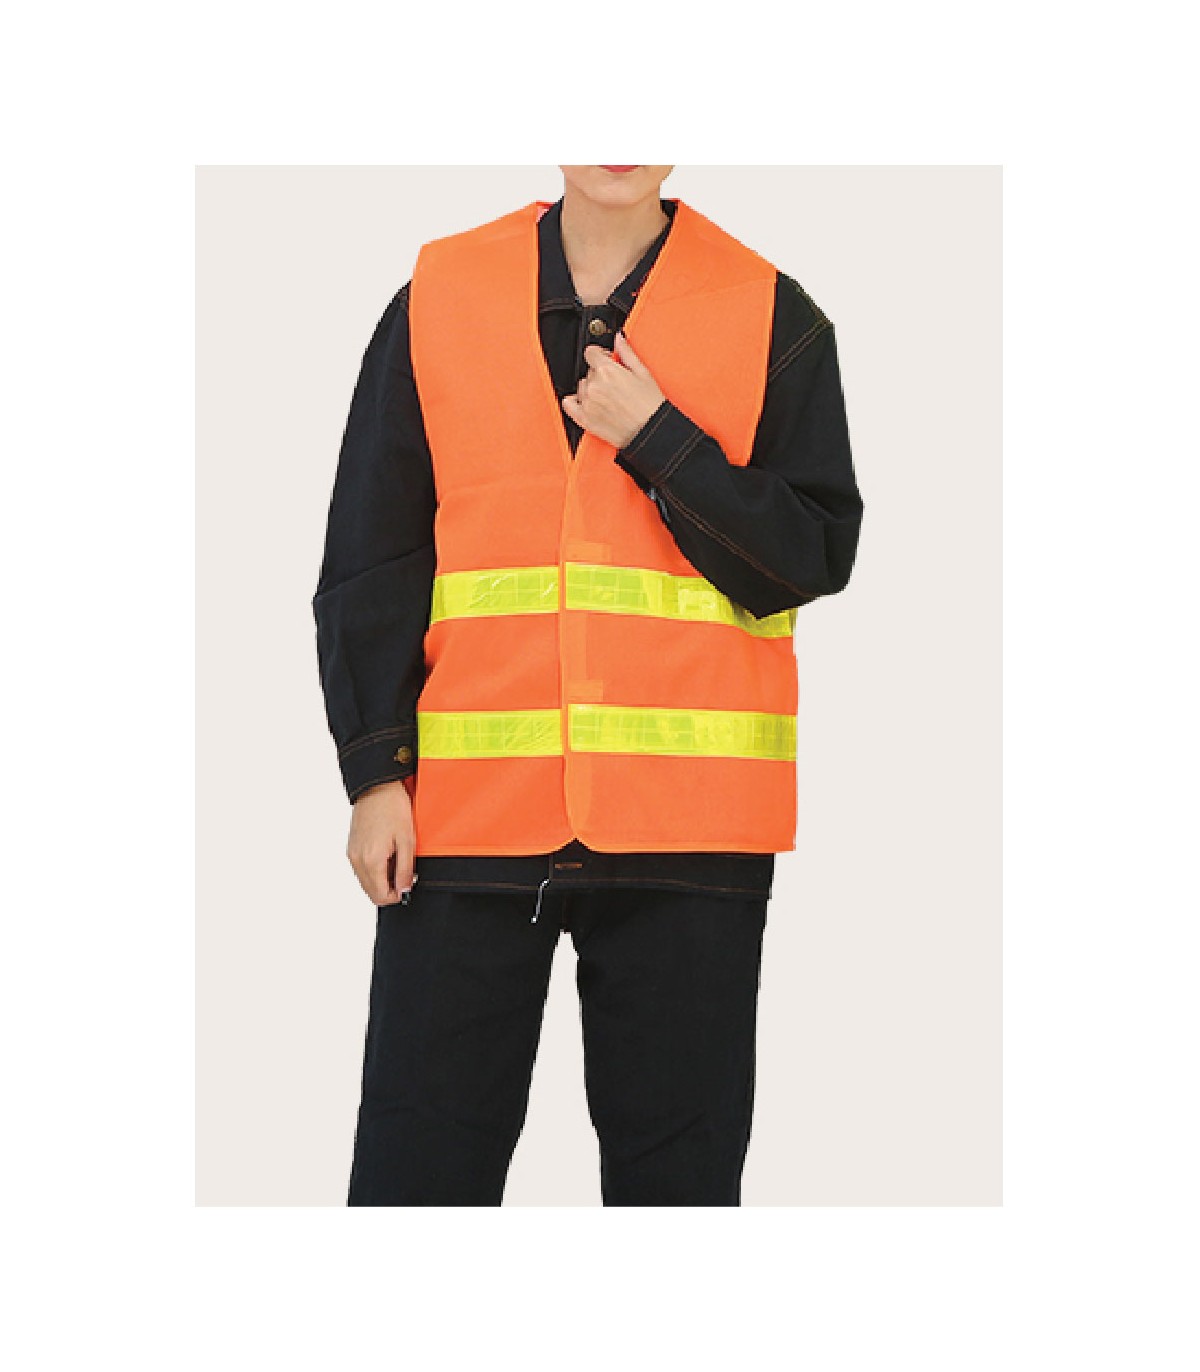 Buy Orange Mesh Safety Vest with yellow reflective strip, printing